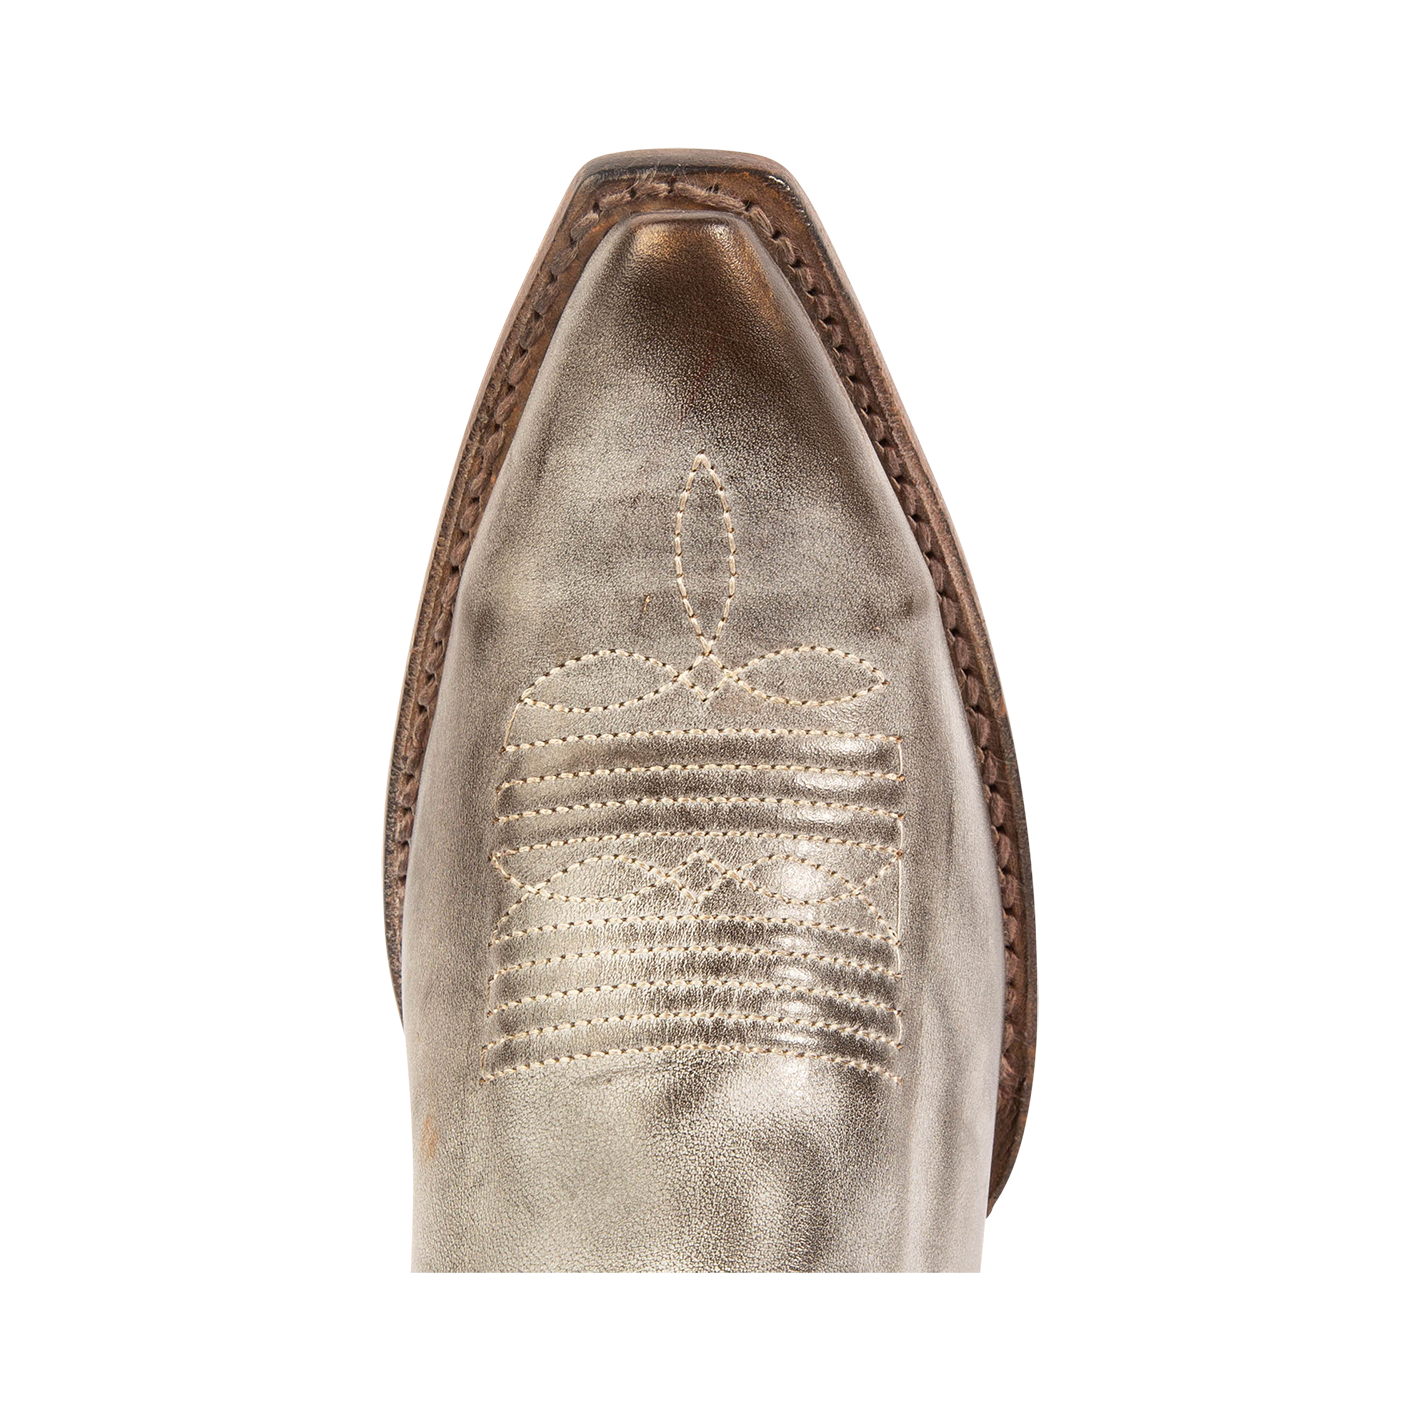 Top view showing snip toe construction and contrasting toe stitching on FREEBIRD women's Starzz beige western boot